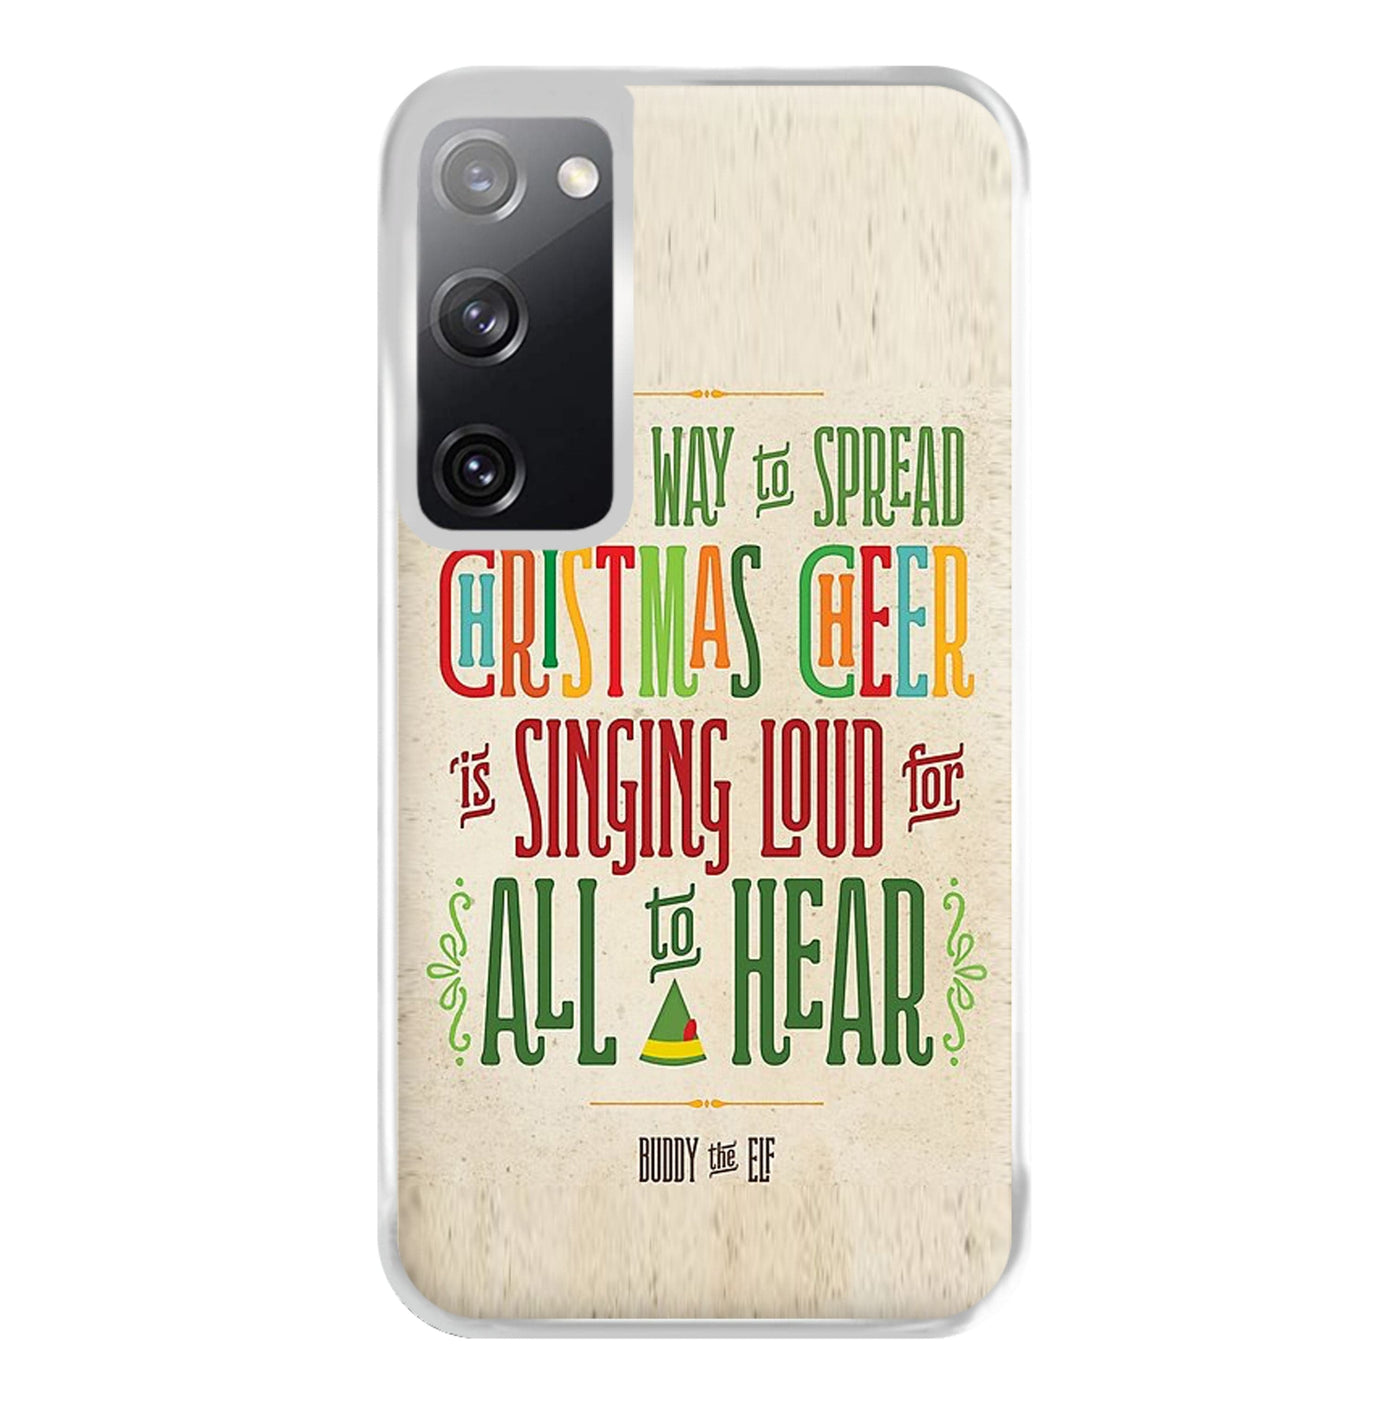 The Best Way To Spead Christmas Cheer - Buddy The Elf Phone Case